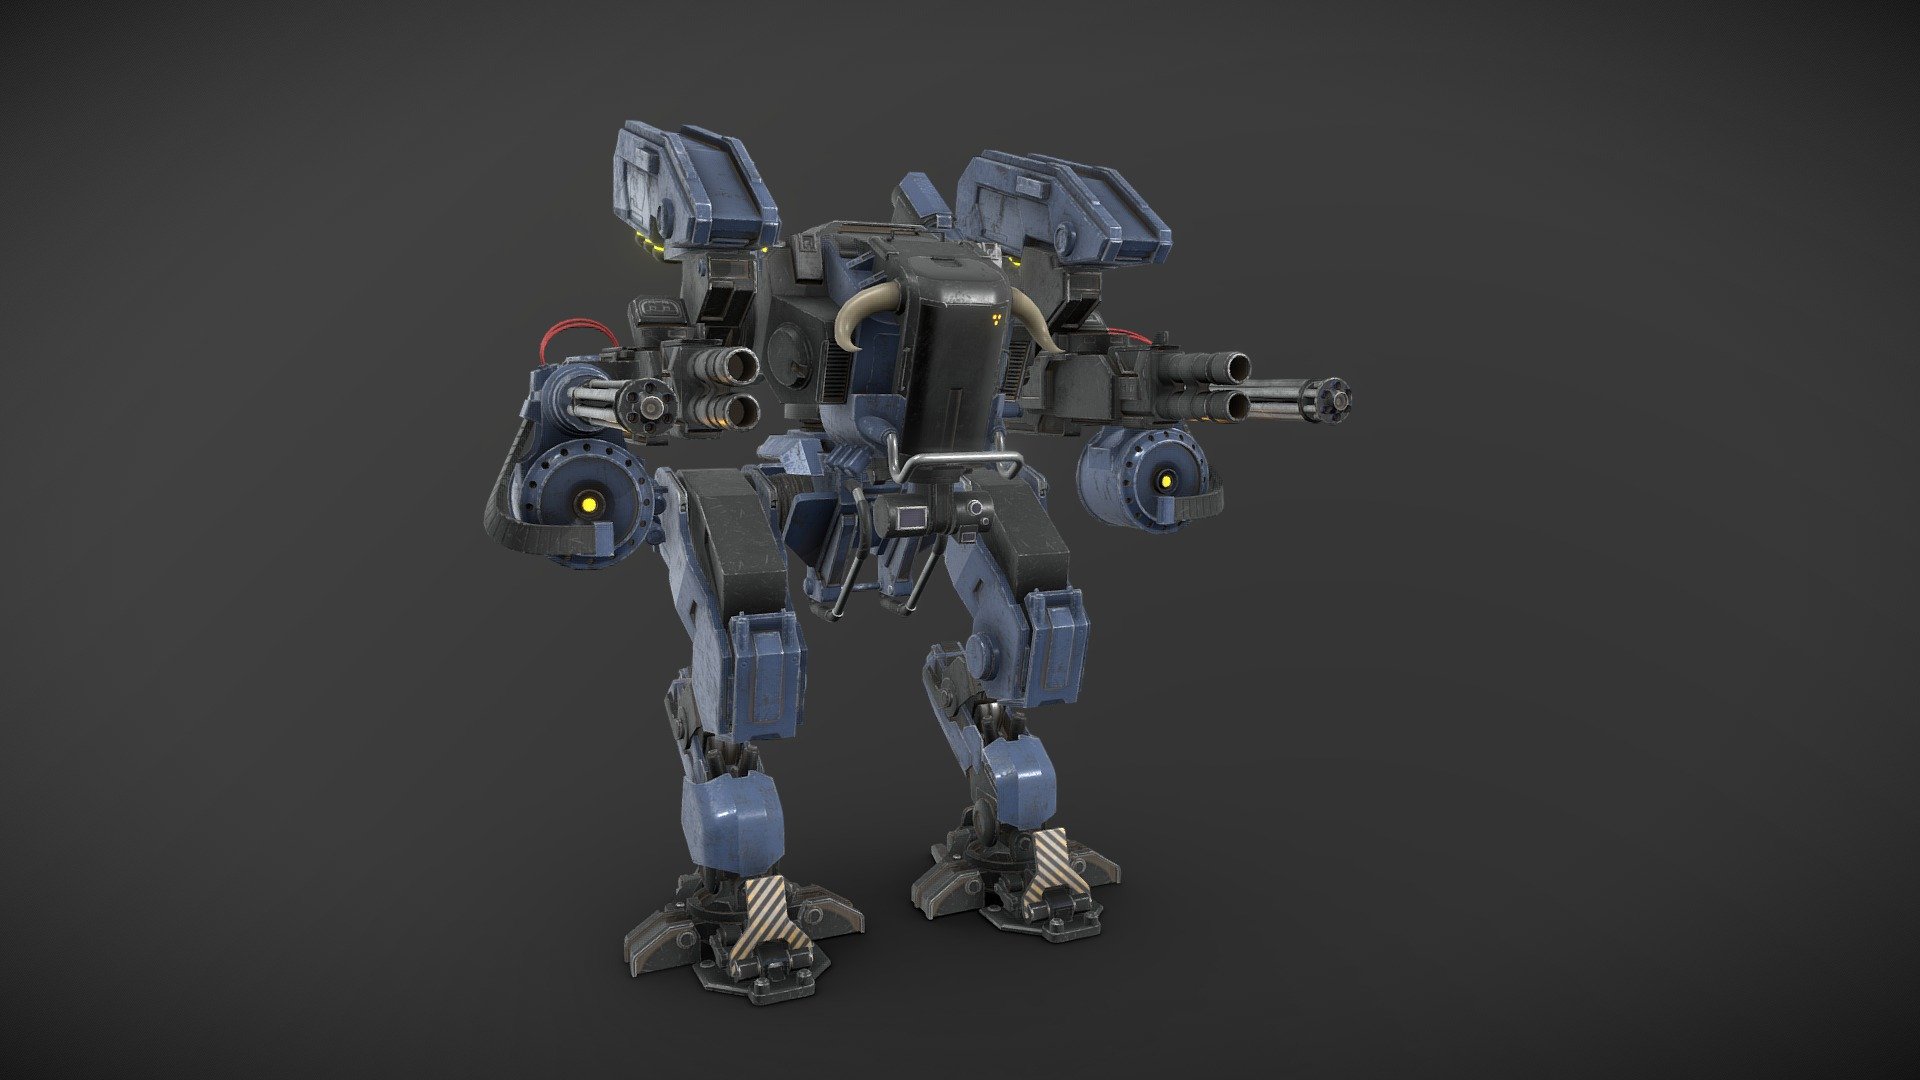 Game ready model. Made as part of the tutorial course from Kaino university.
My software used: Blender, RizomUV, Marmoset Toolbag 4, Substance Painter.
67k triangles;
1 texture set;
4k textures. Render scene in Blender:
 - Mech Robot - 3D model by Dmitry Az (@Dim854) 3d model